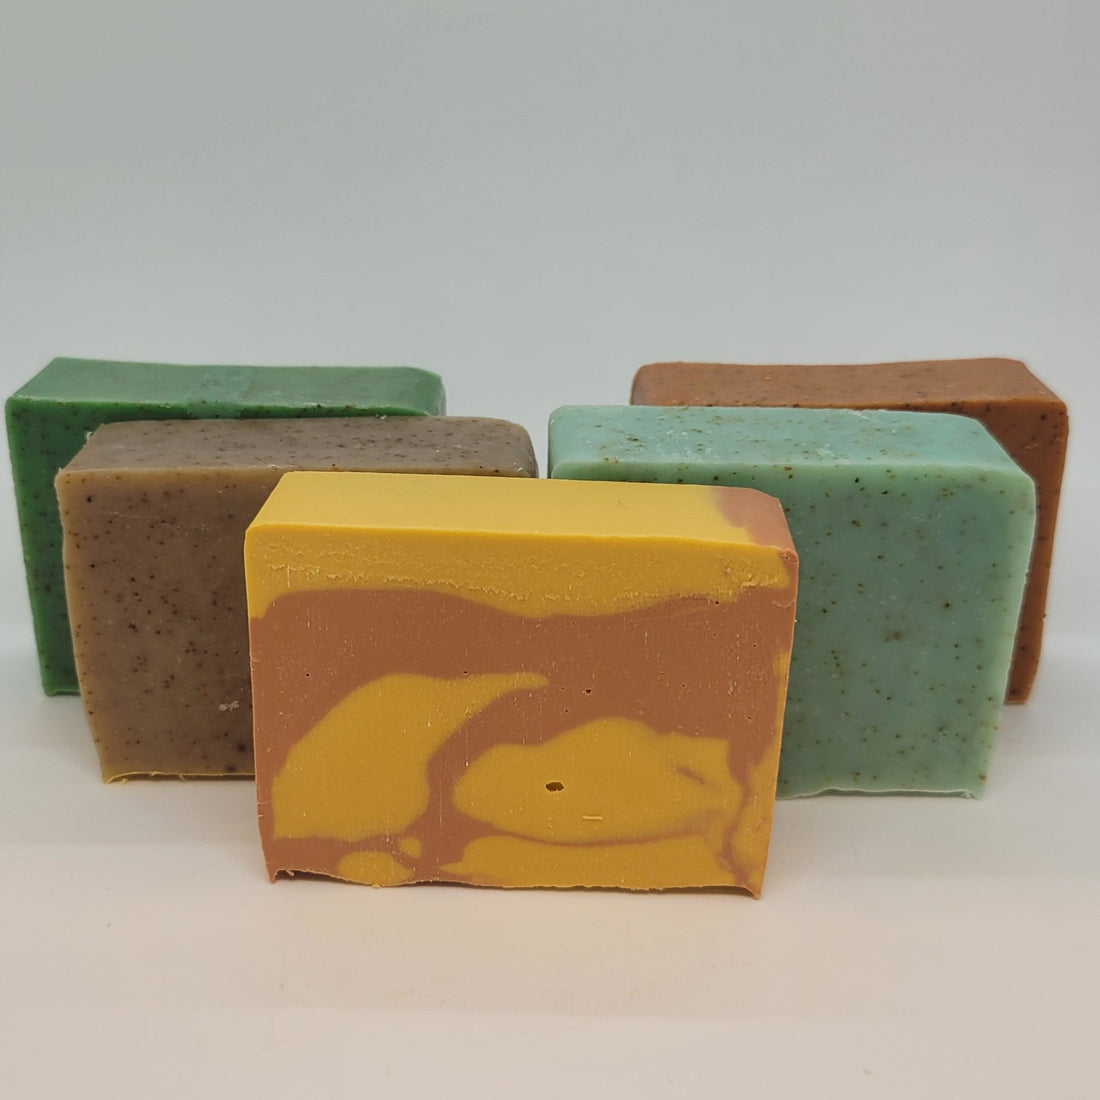 What Are The Benefits Of Using Natural Soap VS. Conventional Soap Against COVID-19? - Steel & Saffron Bath Boutique Inc.